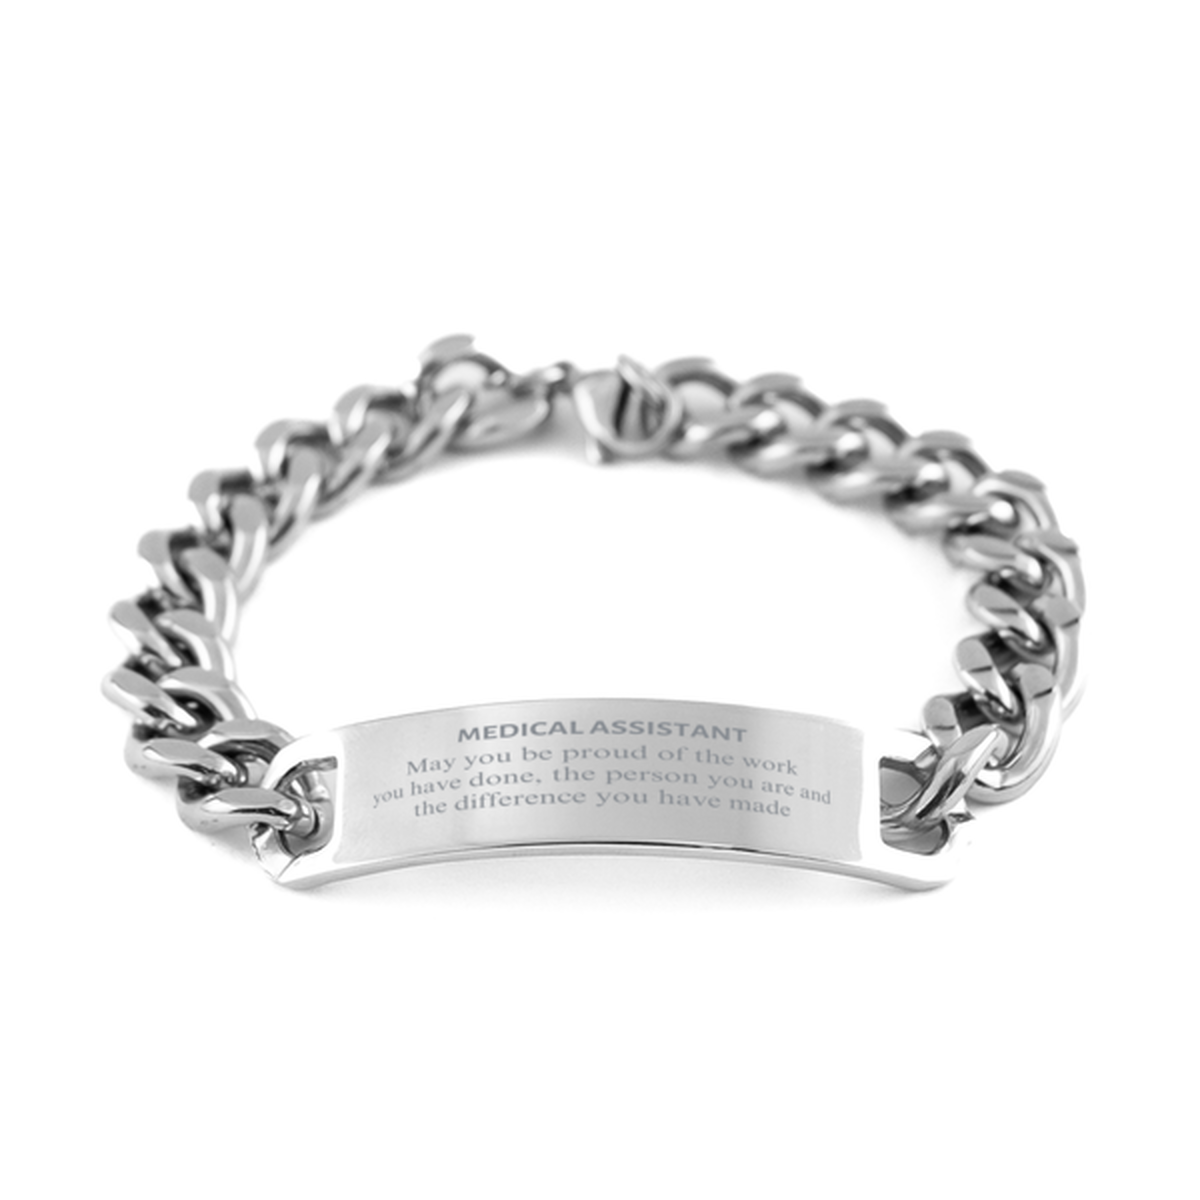 Medical Assistant May you be proud of the work you have done, Retirement Medical Assistant Cuban Chain Stainless Steel Bracelet for Colleague Appreciation Gifts Amazing for Medical Assistant